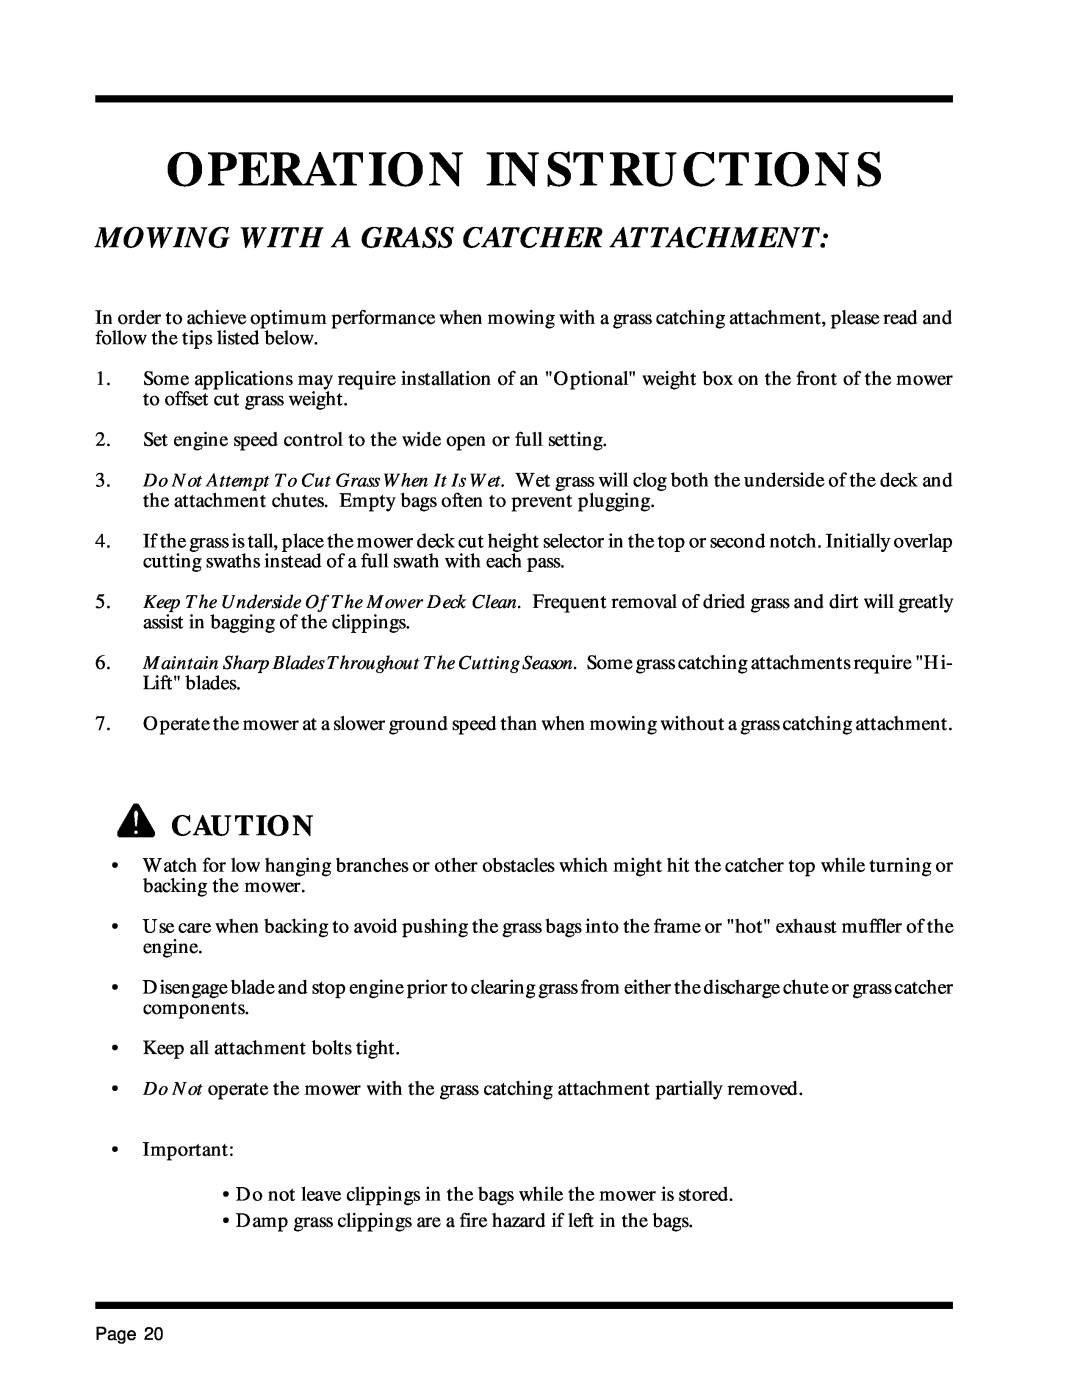 Dixon 13088-1100A manual Mowing With A Grass Catcher Attachment, Operation Instructions 